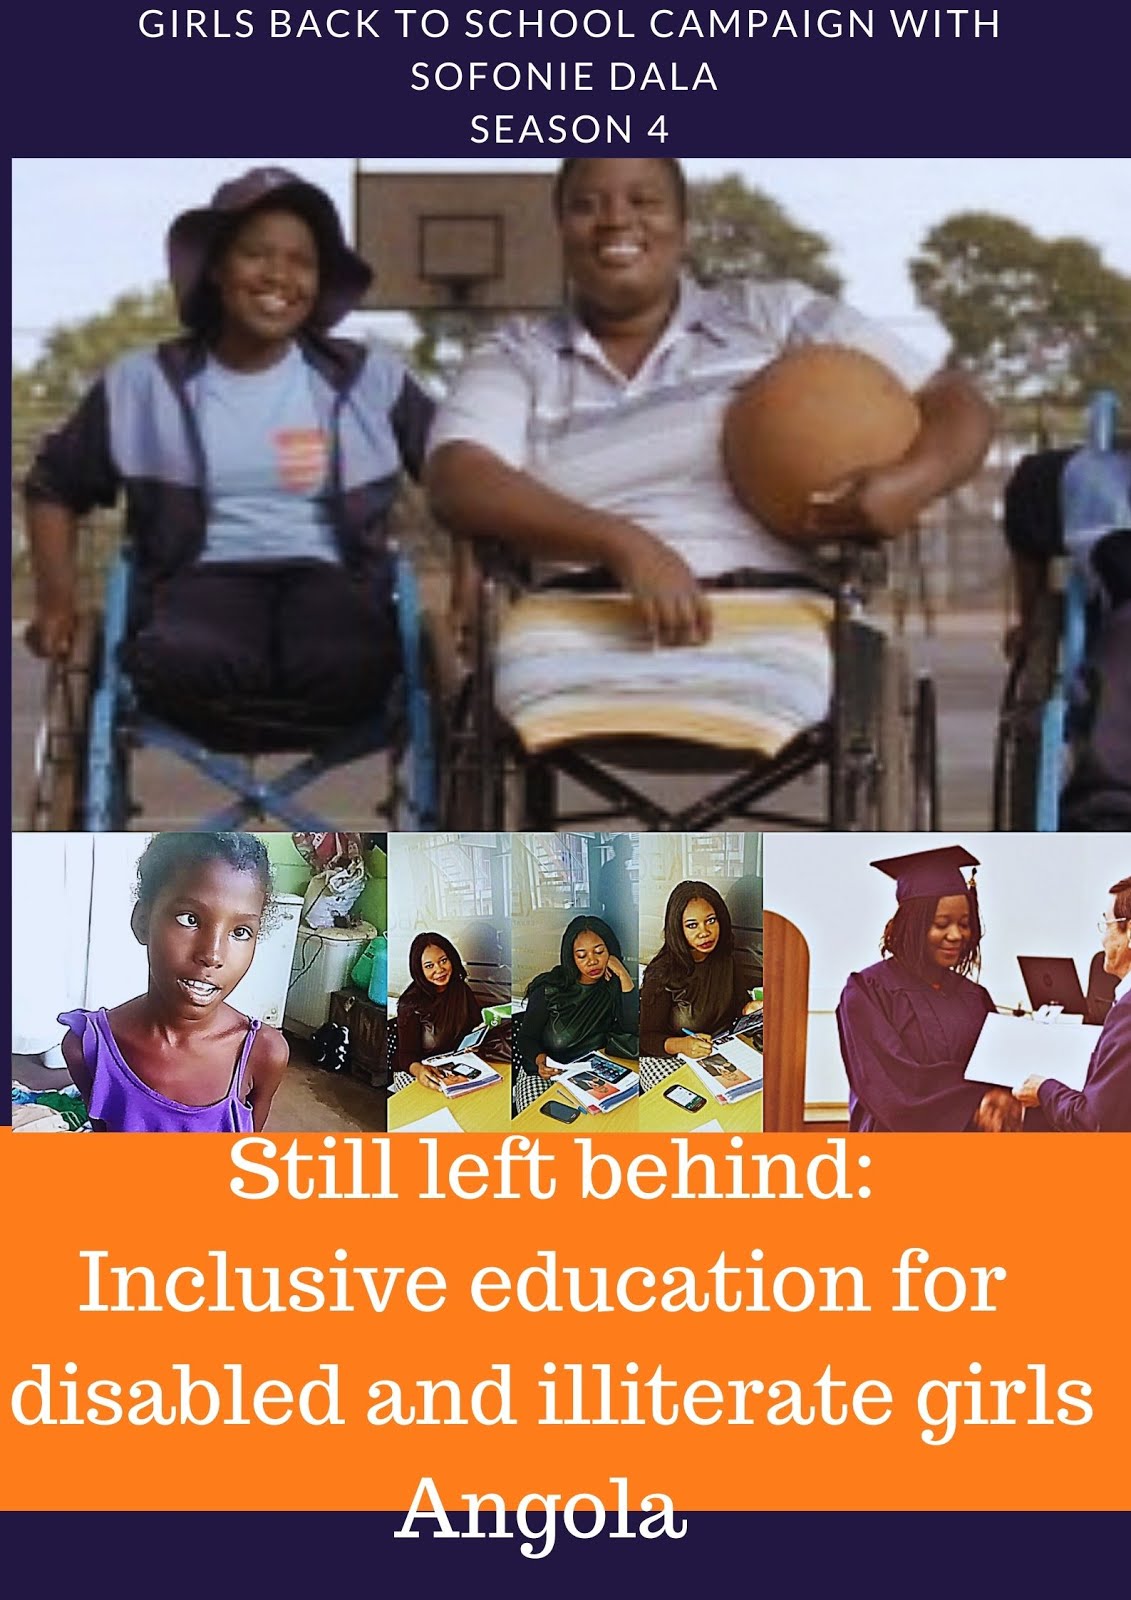 Inclusive education for disabled and illiterate girls